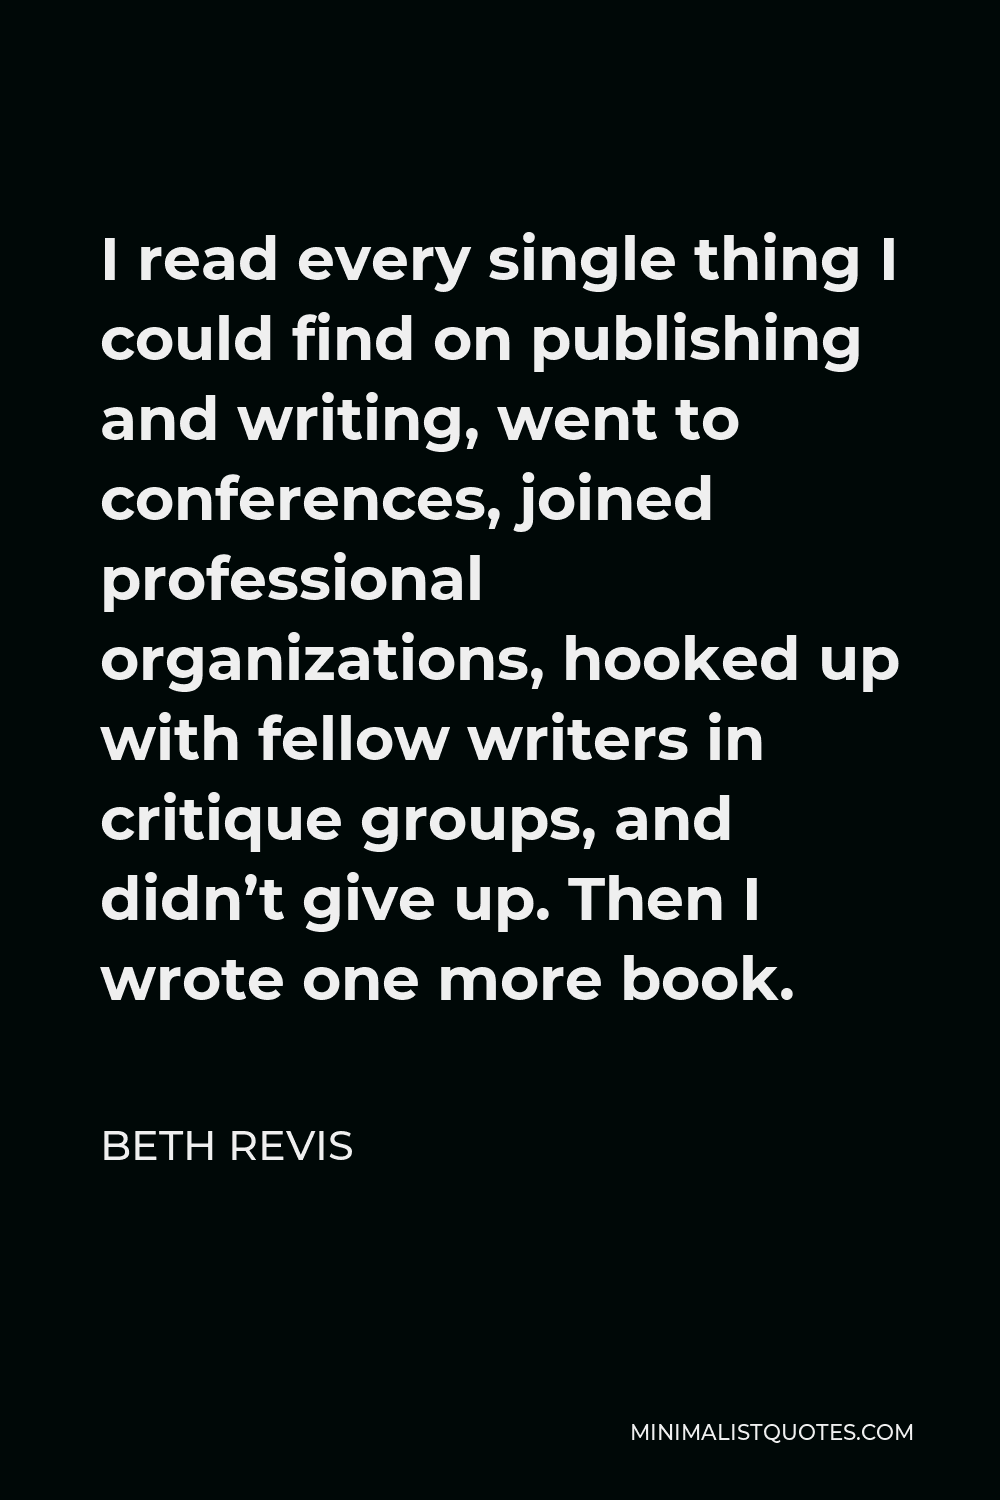 Beth Revis Quote - I read every single thing I could find on publishing and writing, went to conferences, joined professional organizations, hooked up with fellow writers in critique groups, and didn’t give up. Then I wrote one more book.